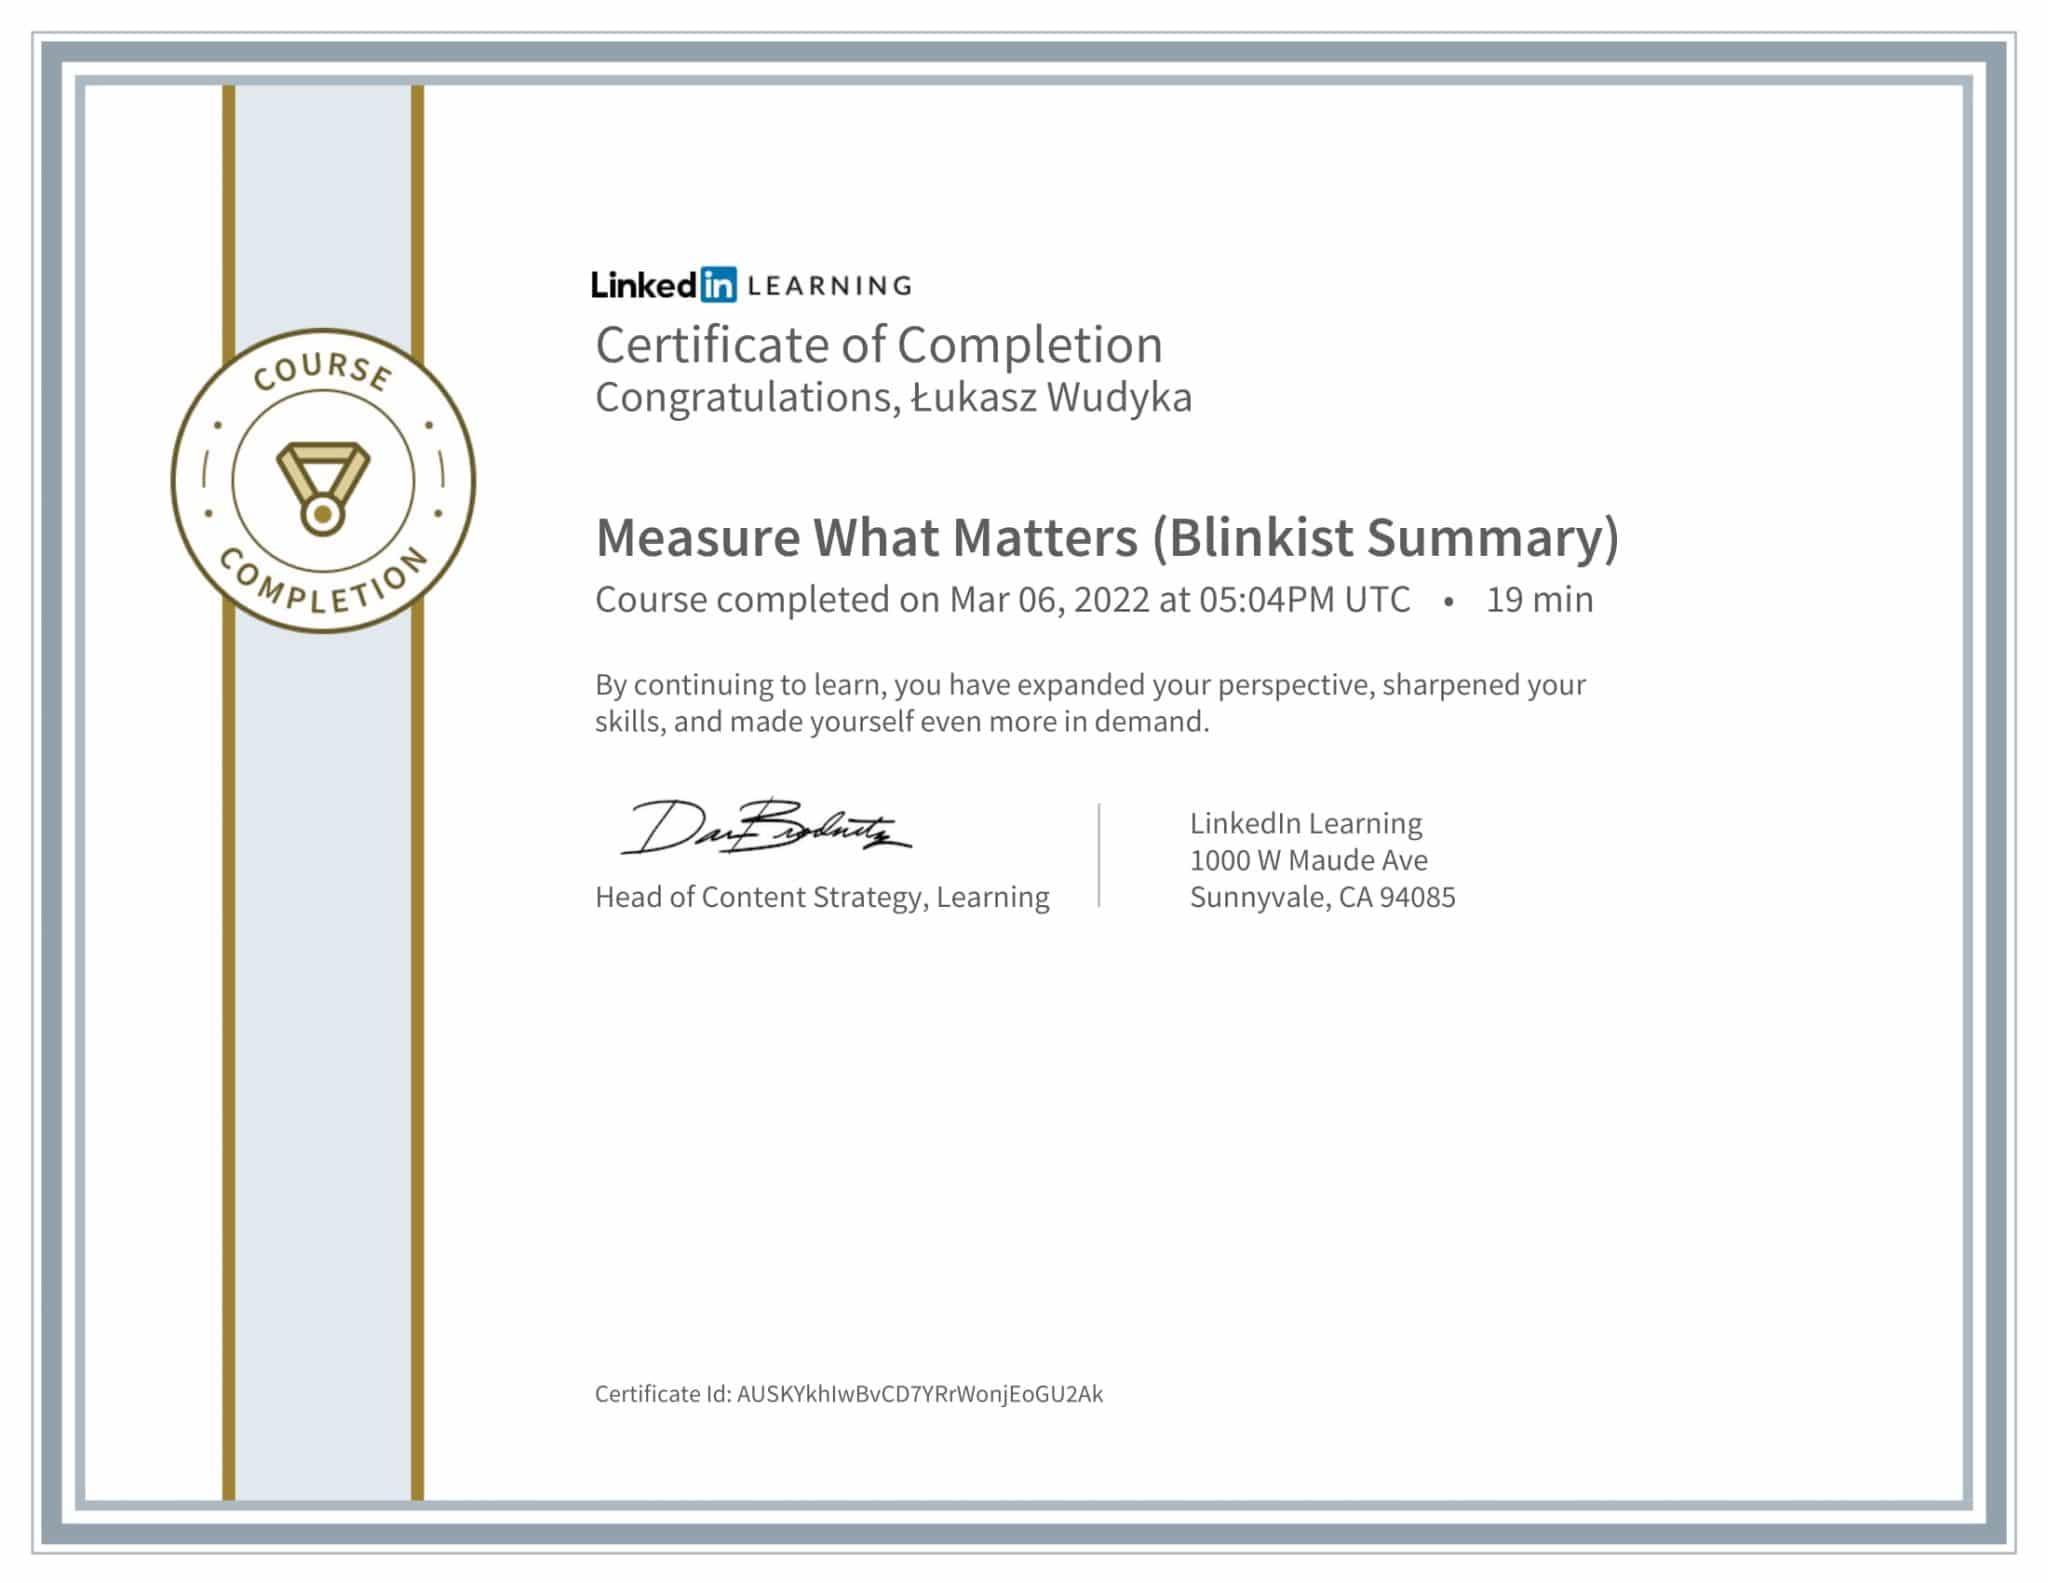 CertificateOfCompletion_Measure What Matters Blinkist Summary-1